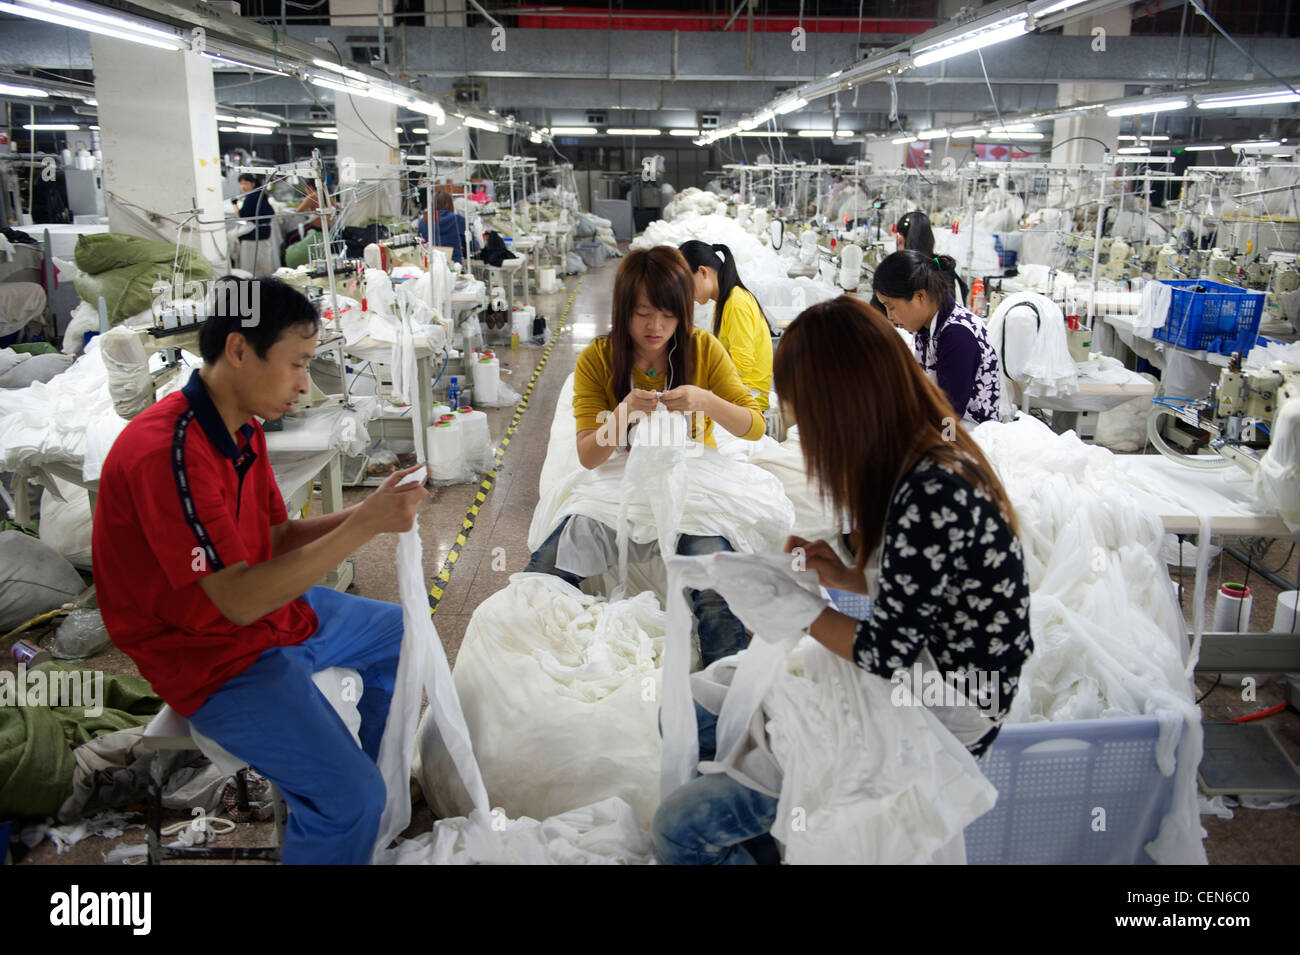 Factory workshop of Langsha Group,  country's largest producer of socks and stockings, in Yiwu, Zhejiang, China.  07-Nov-2011 Stock Photo